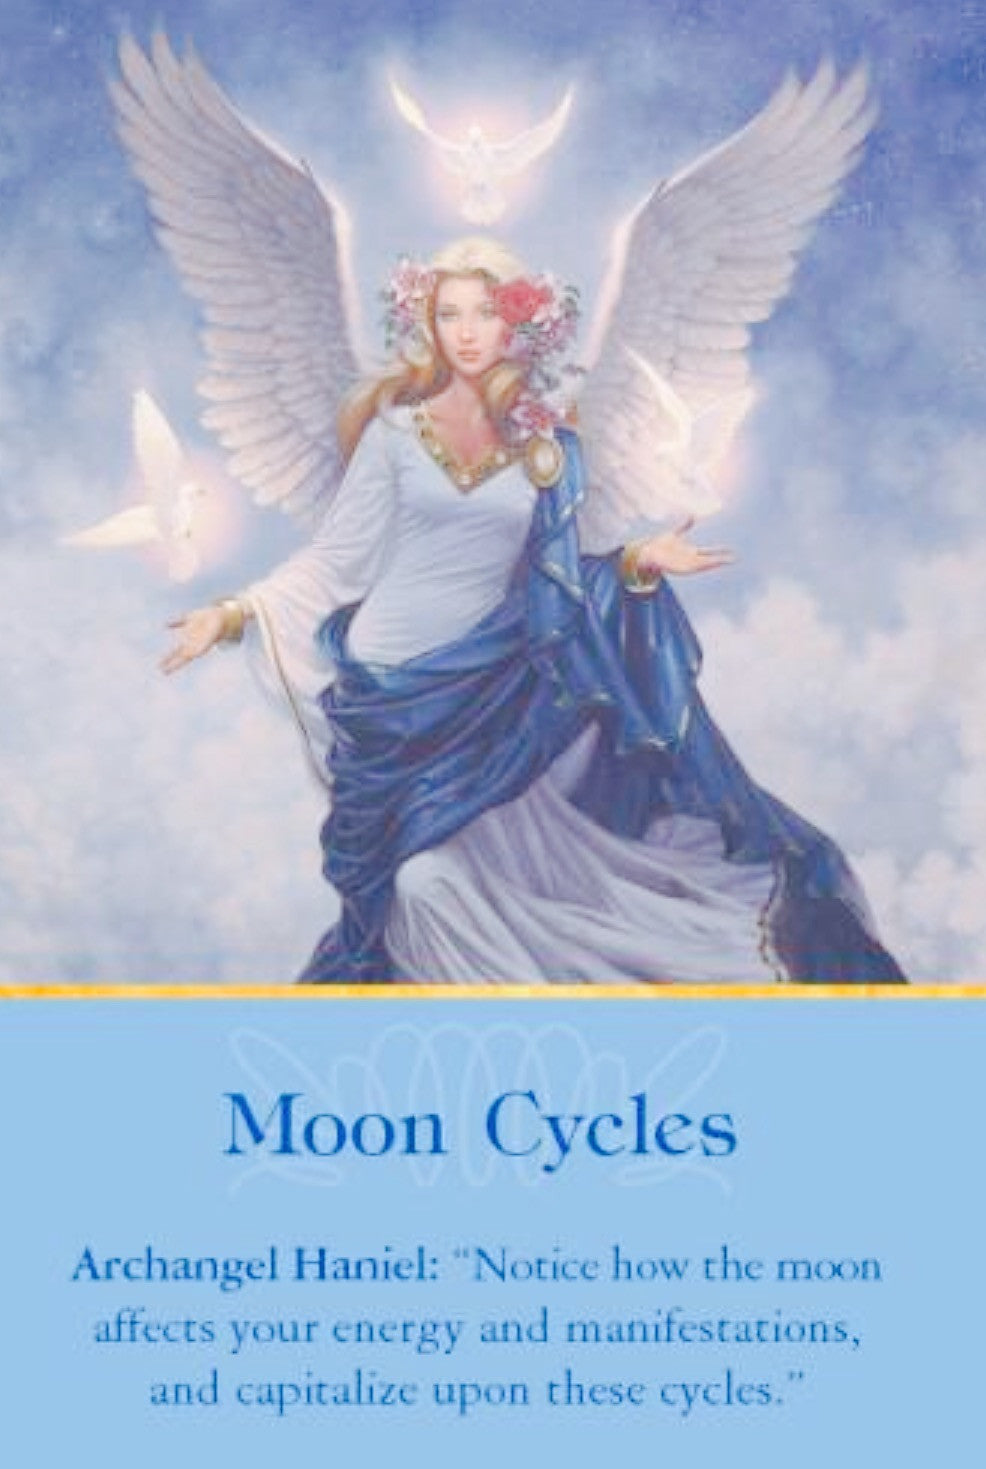 Archangel Haniel: “Notice how the moon affects your energy and manifestations, and capitalize upon these cycles.”